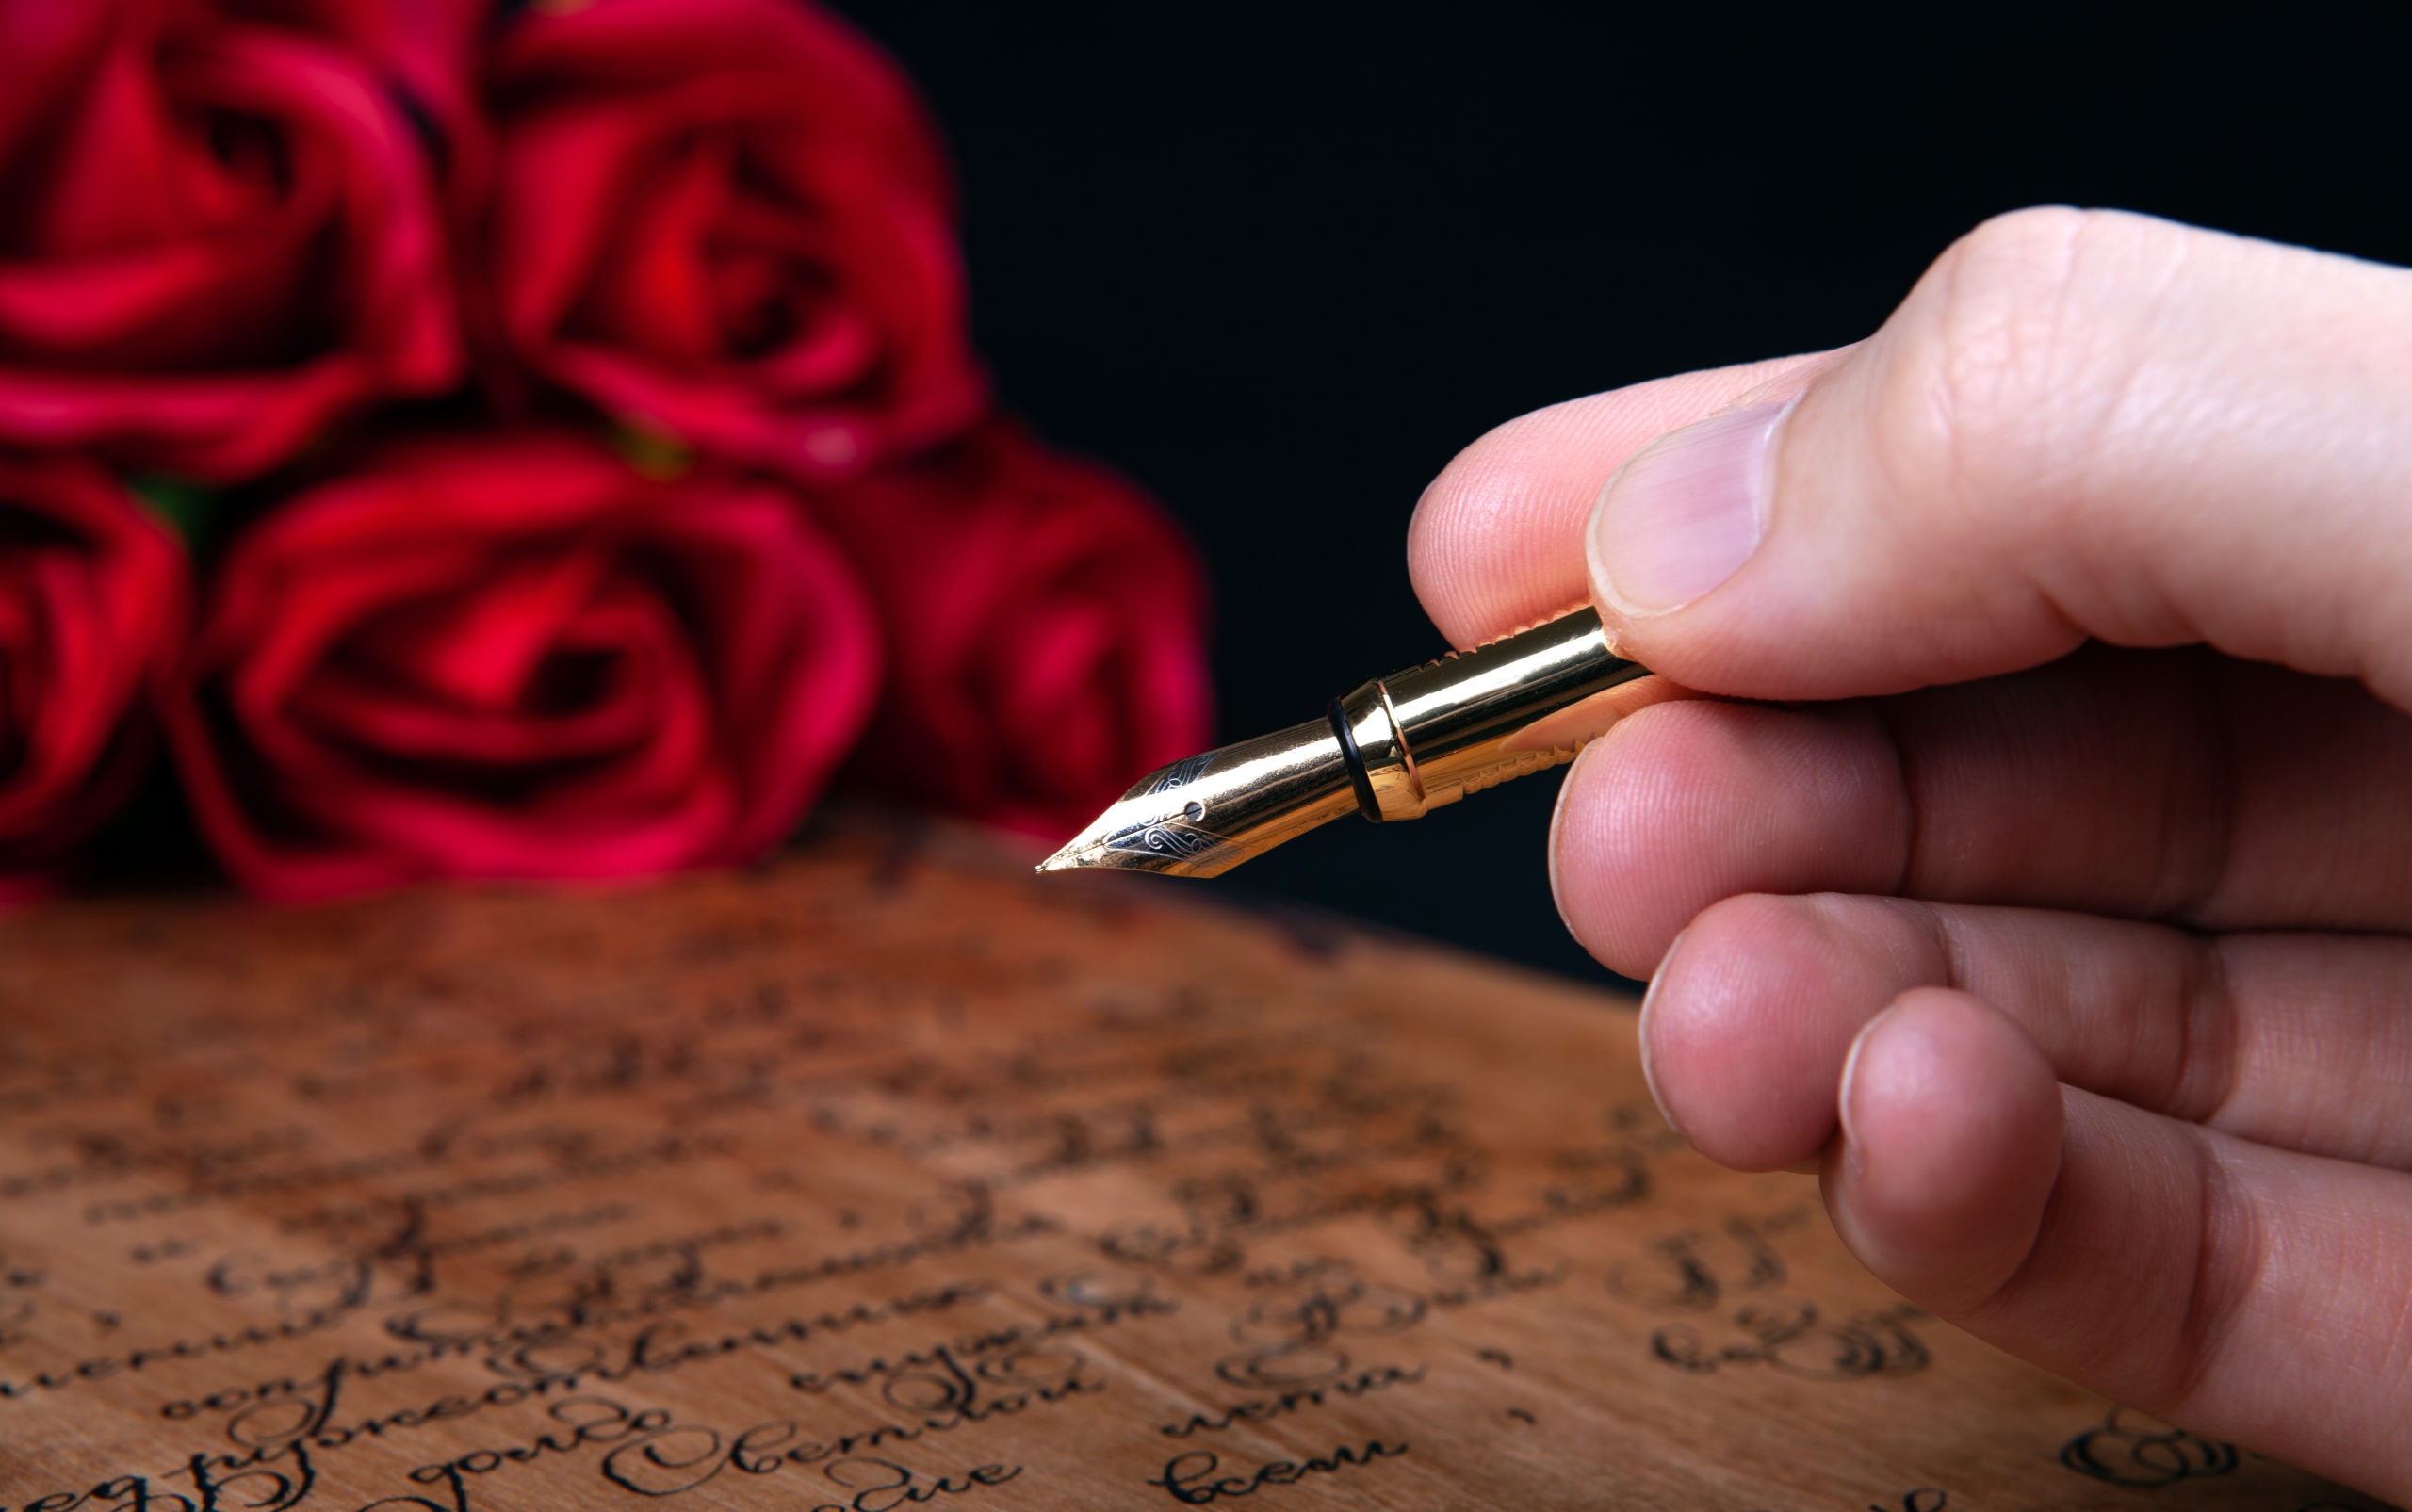 fountain pen in the hand on letter with text and red roses.